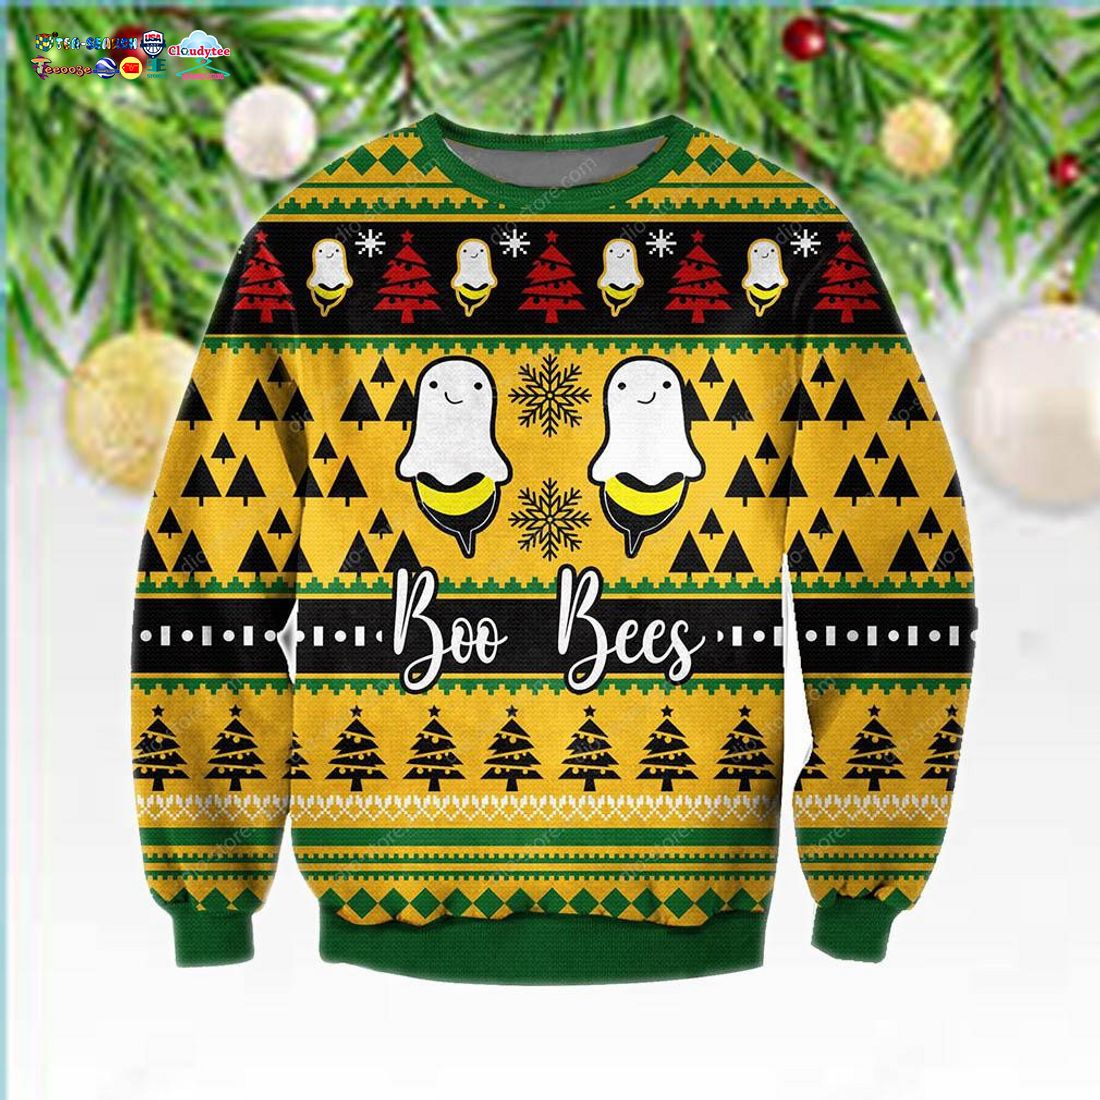 Boo Bees Ugly Christmas Sweater